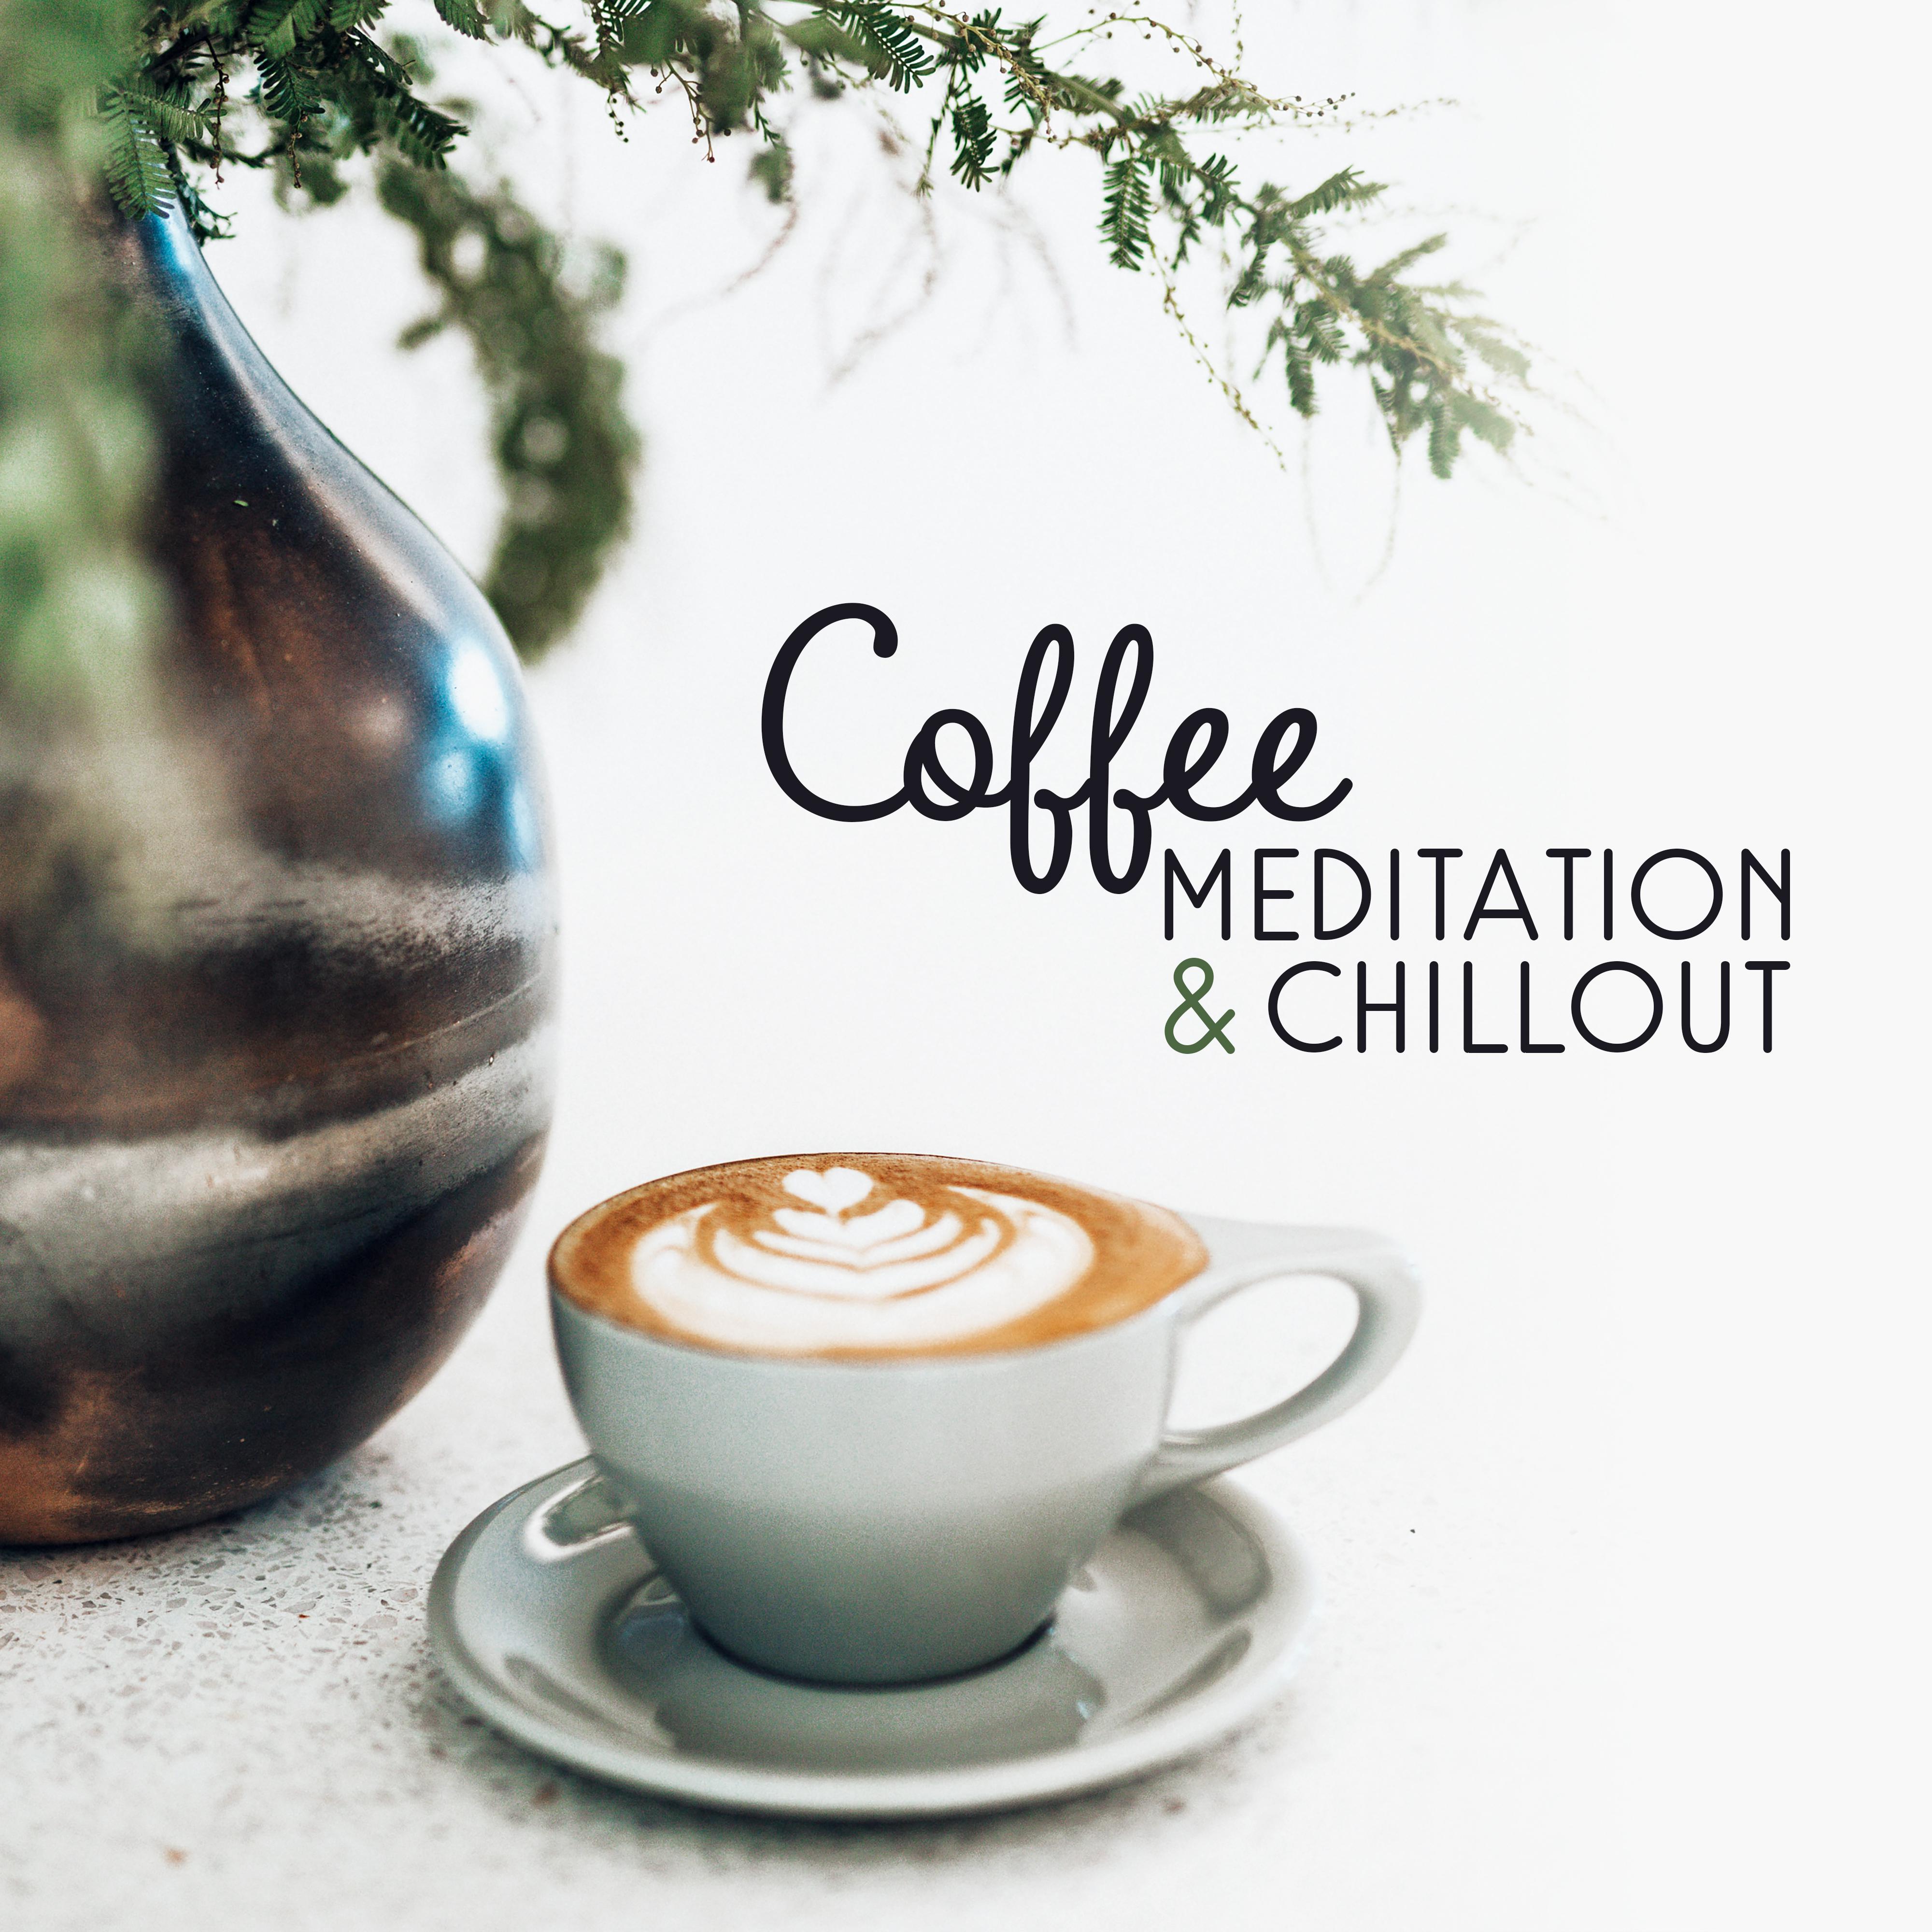 Coffee Meditation & Chillout